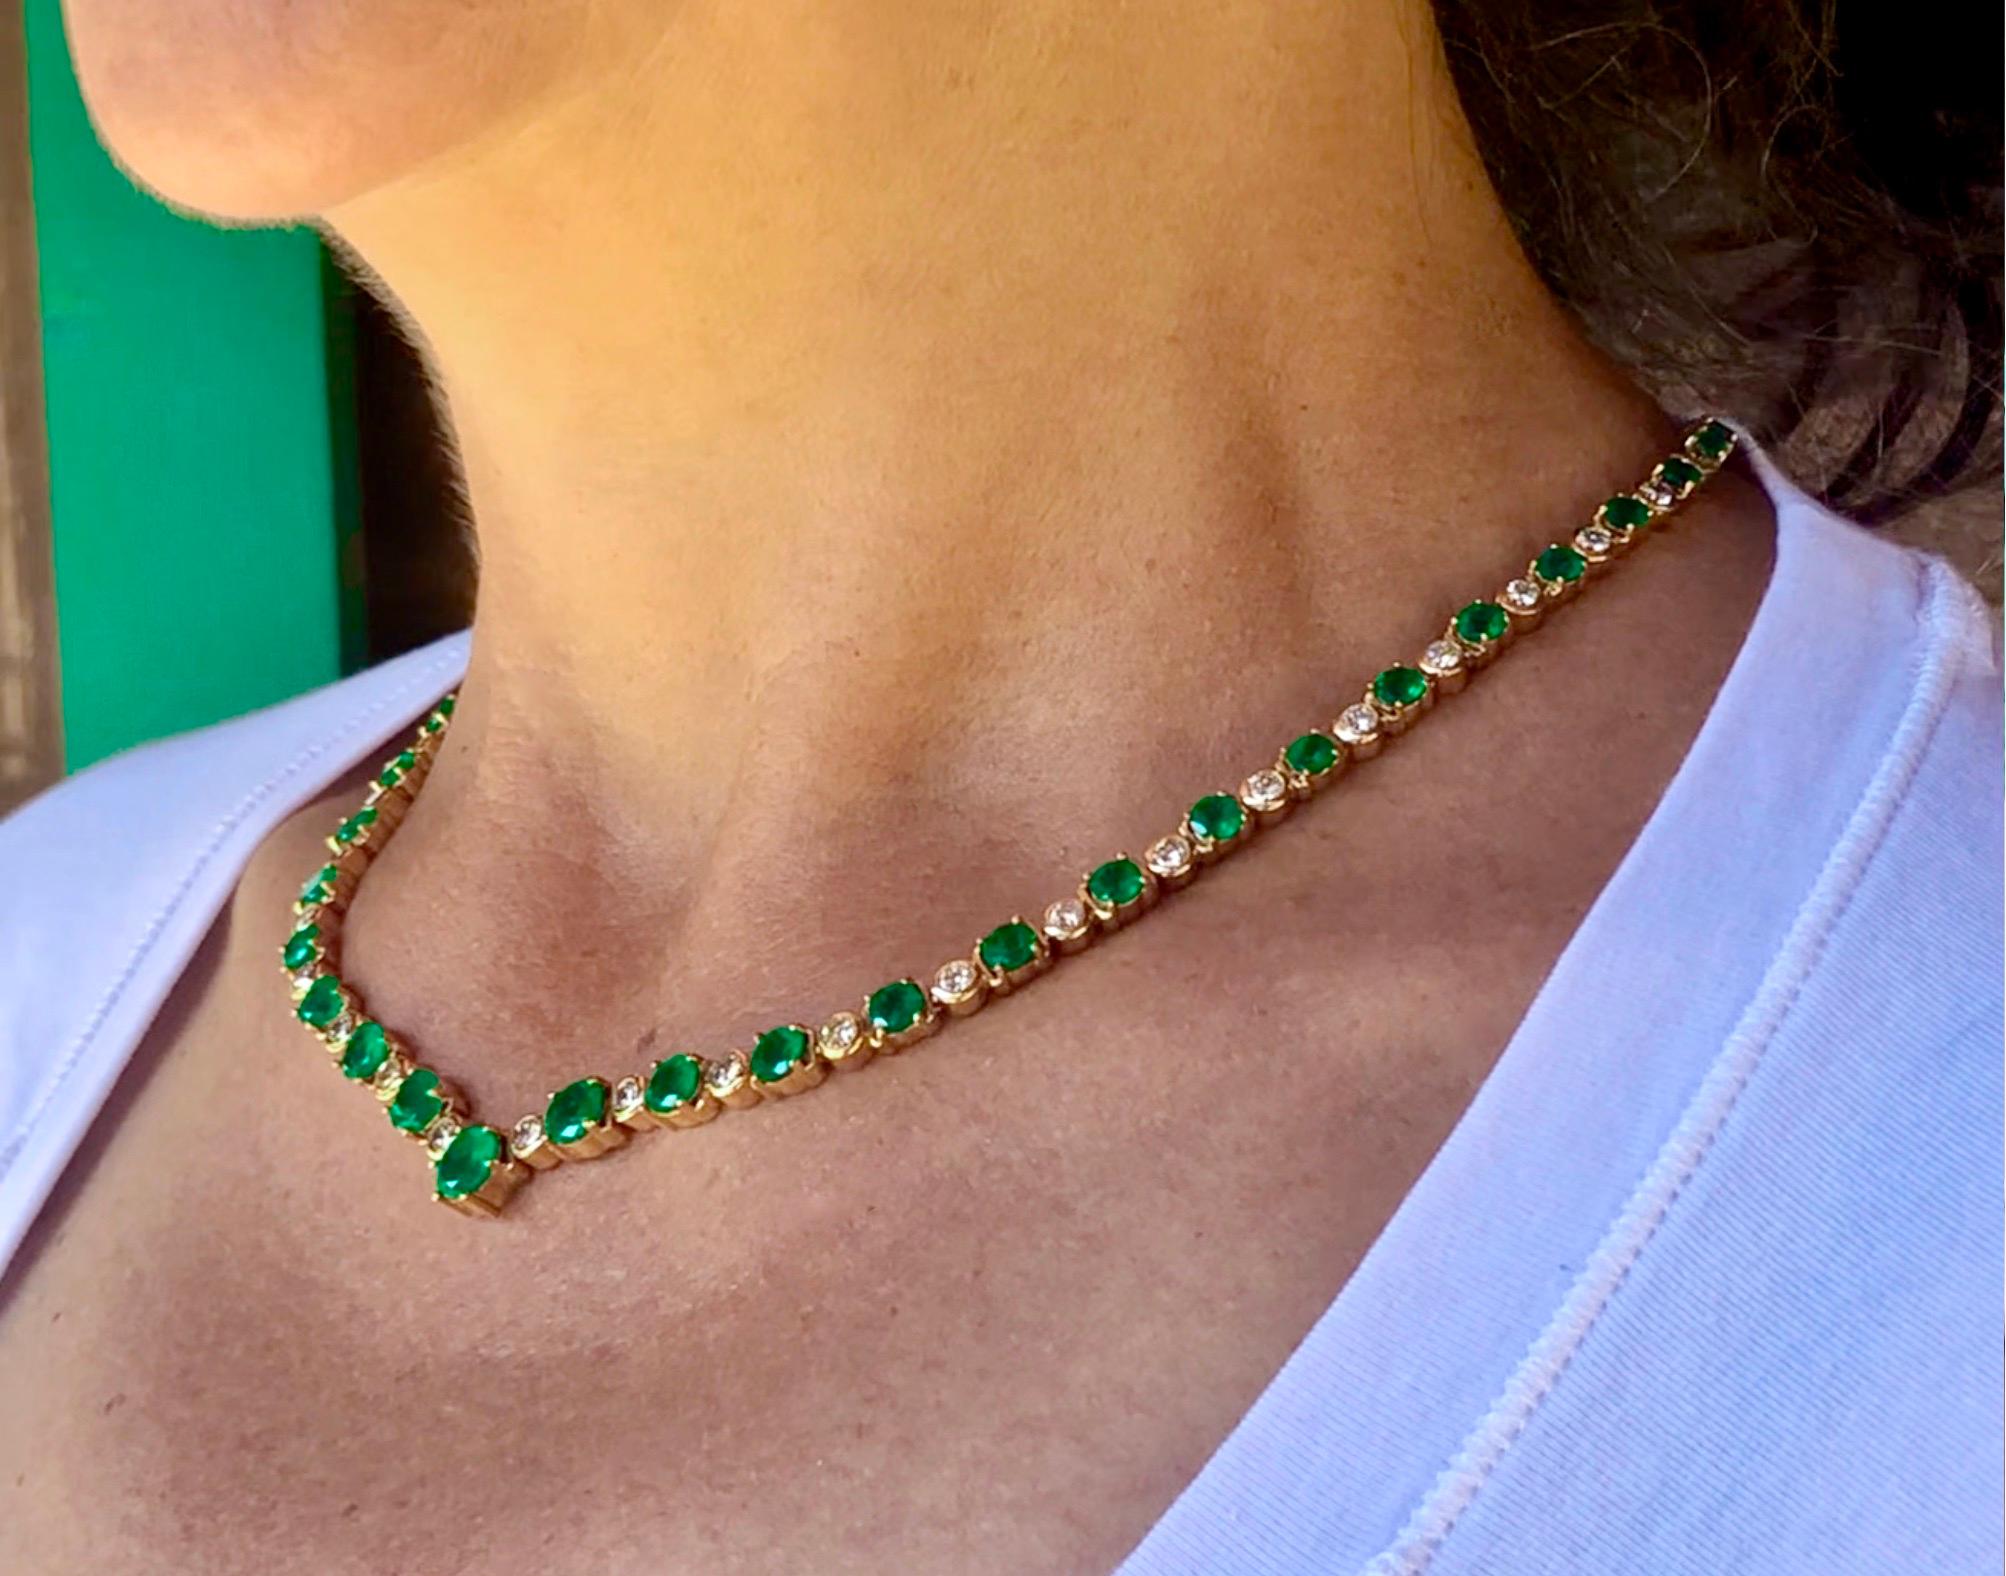 Four Prongs And Bezel Set 18k Yellow Gold Graduated Brilliant Round Cut Diamonds And Colombian Natural Emerald Tennis Necklaces. The Necklace Weighs Over 22.00ctw. This Necklace Has  59 Natural Emeralds Over 17.00 Carats That Graduate. The